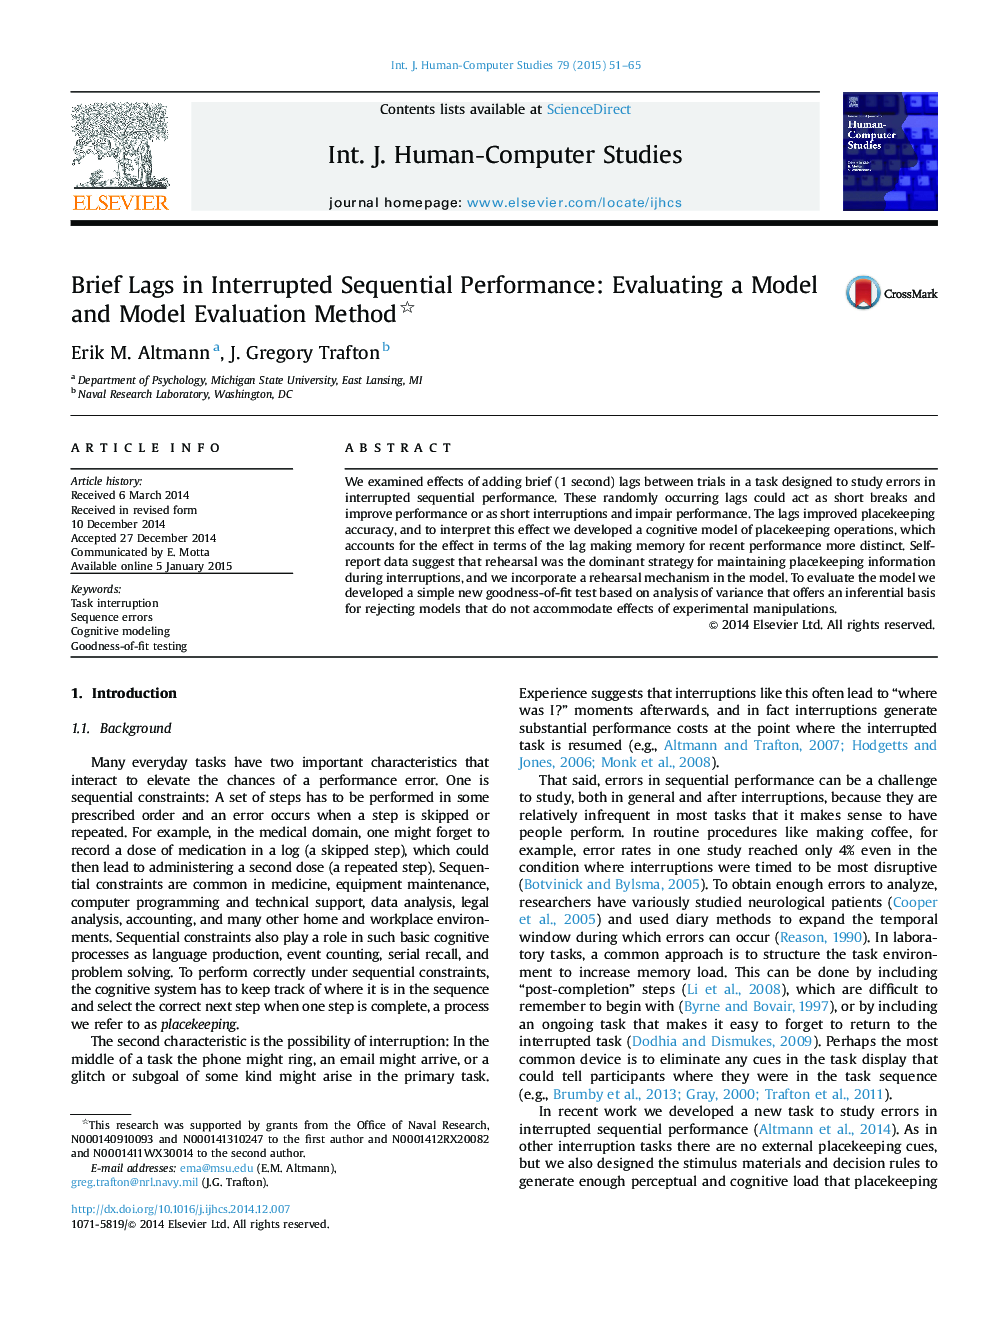 Brief Lags in Interrupted Sequential Performance: Evaluating a Model and Model Evaluation Method 